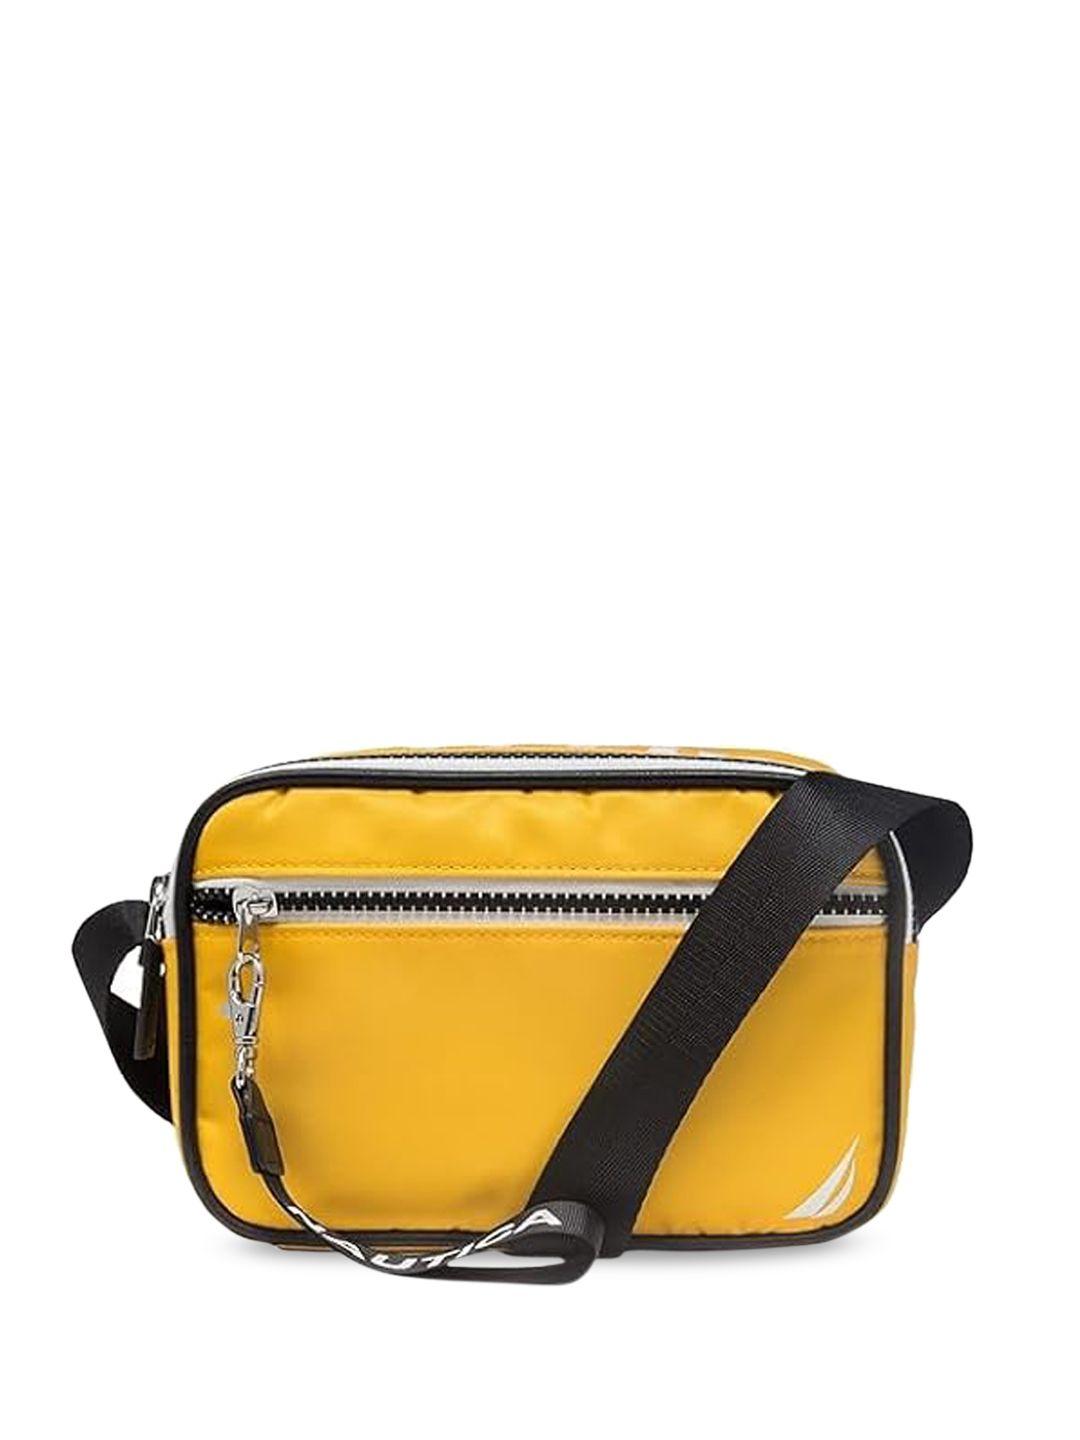 nautica structured sling bag with tasselled